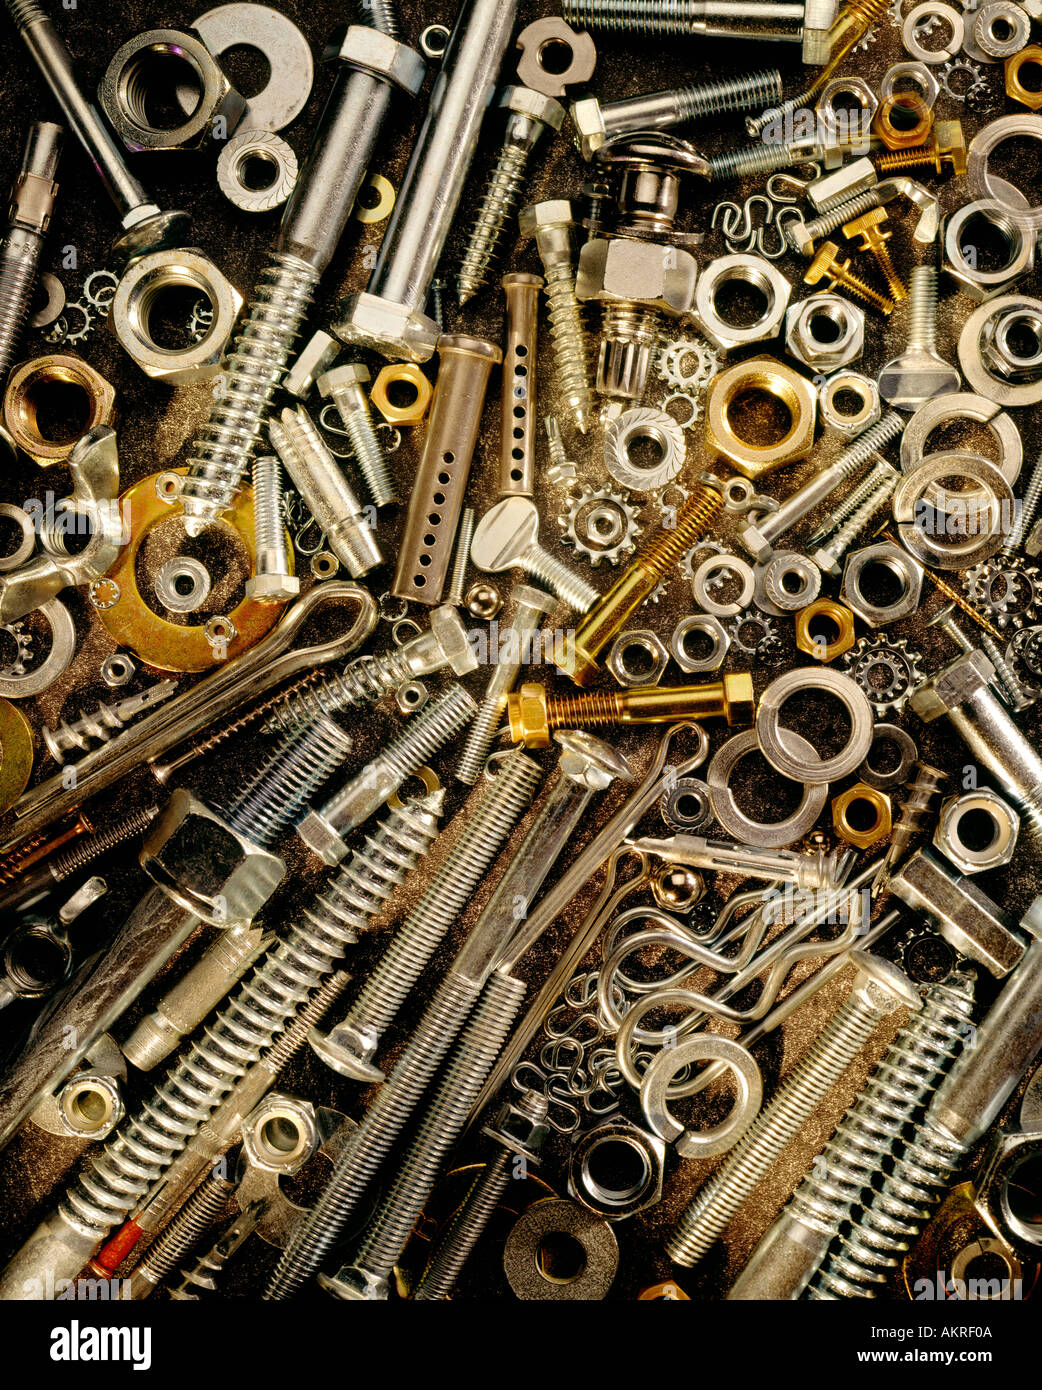 nuts bolts and industrial fasteners still life Stock Photo